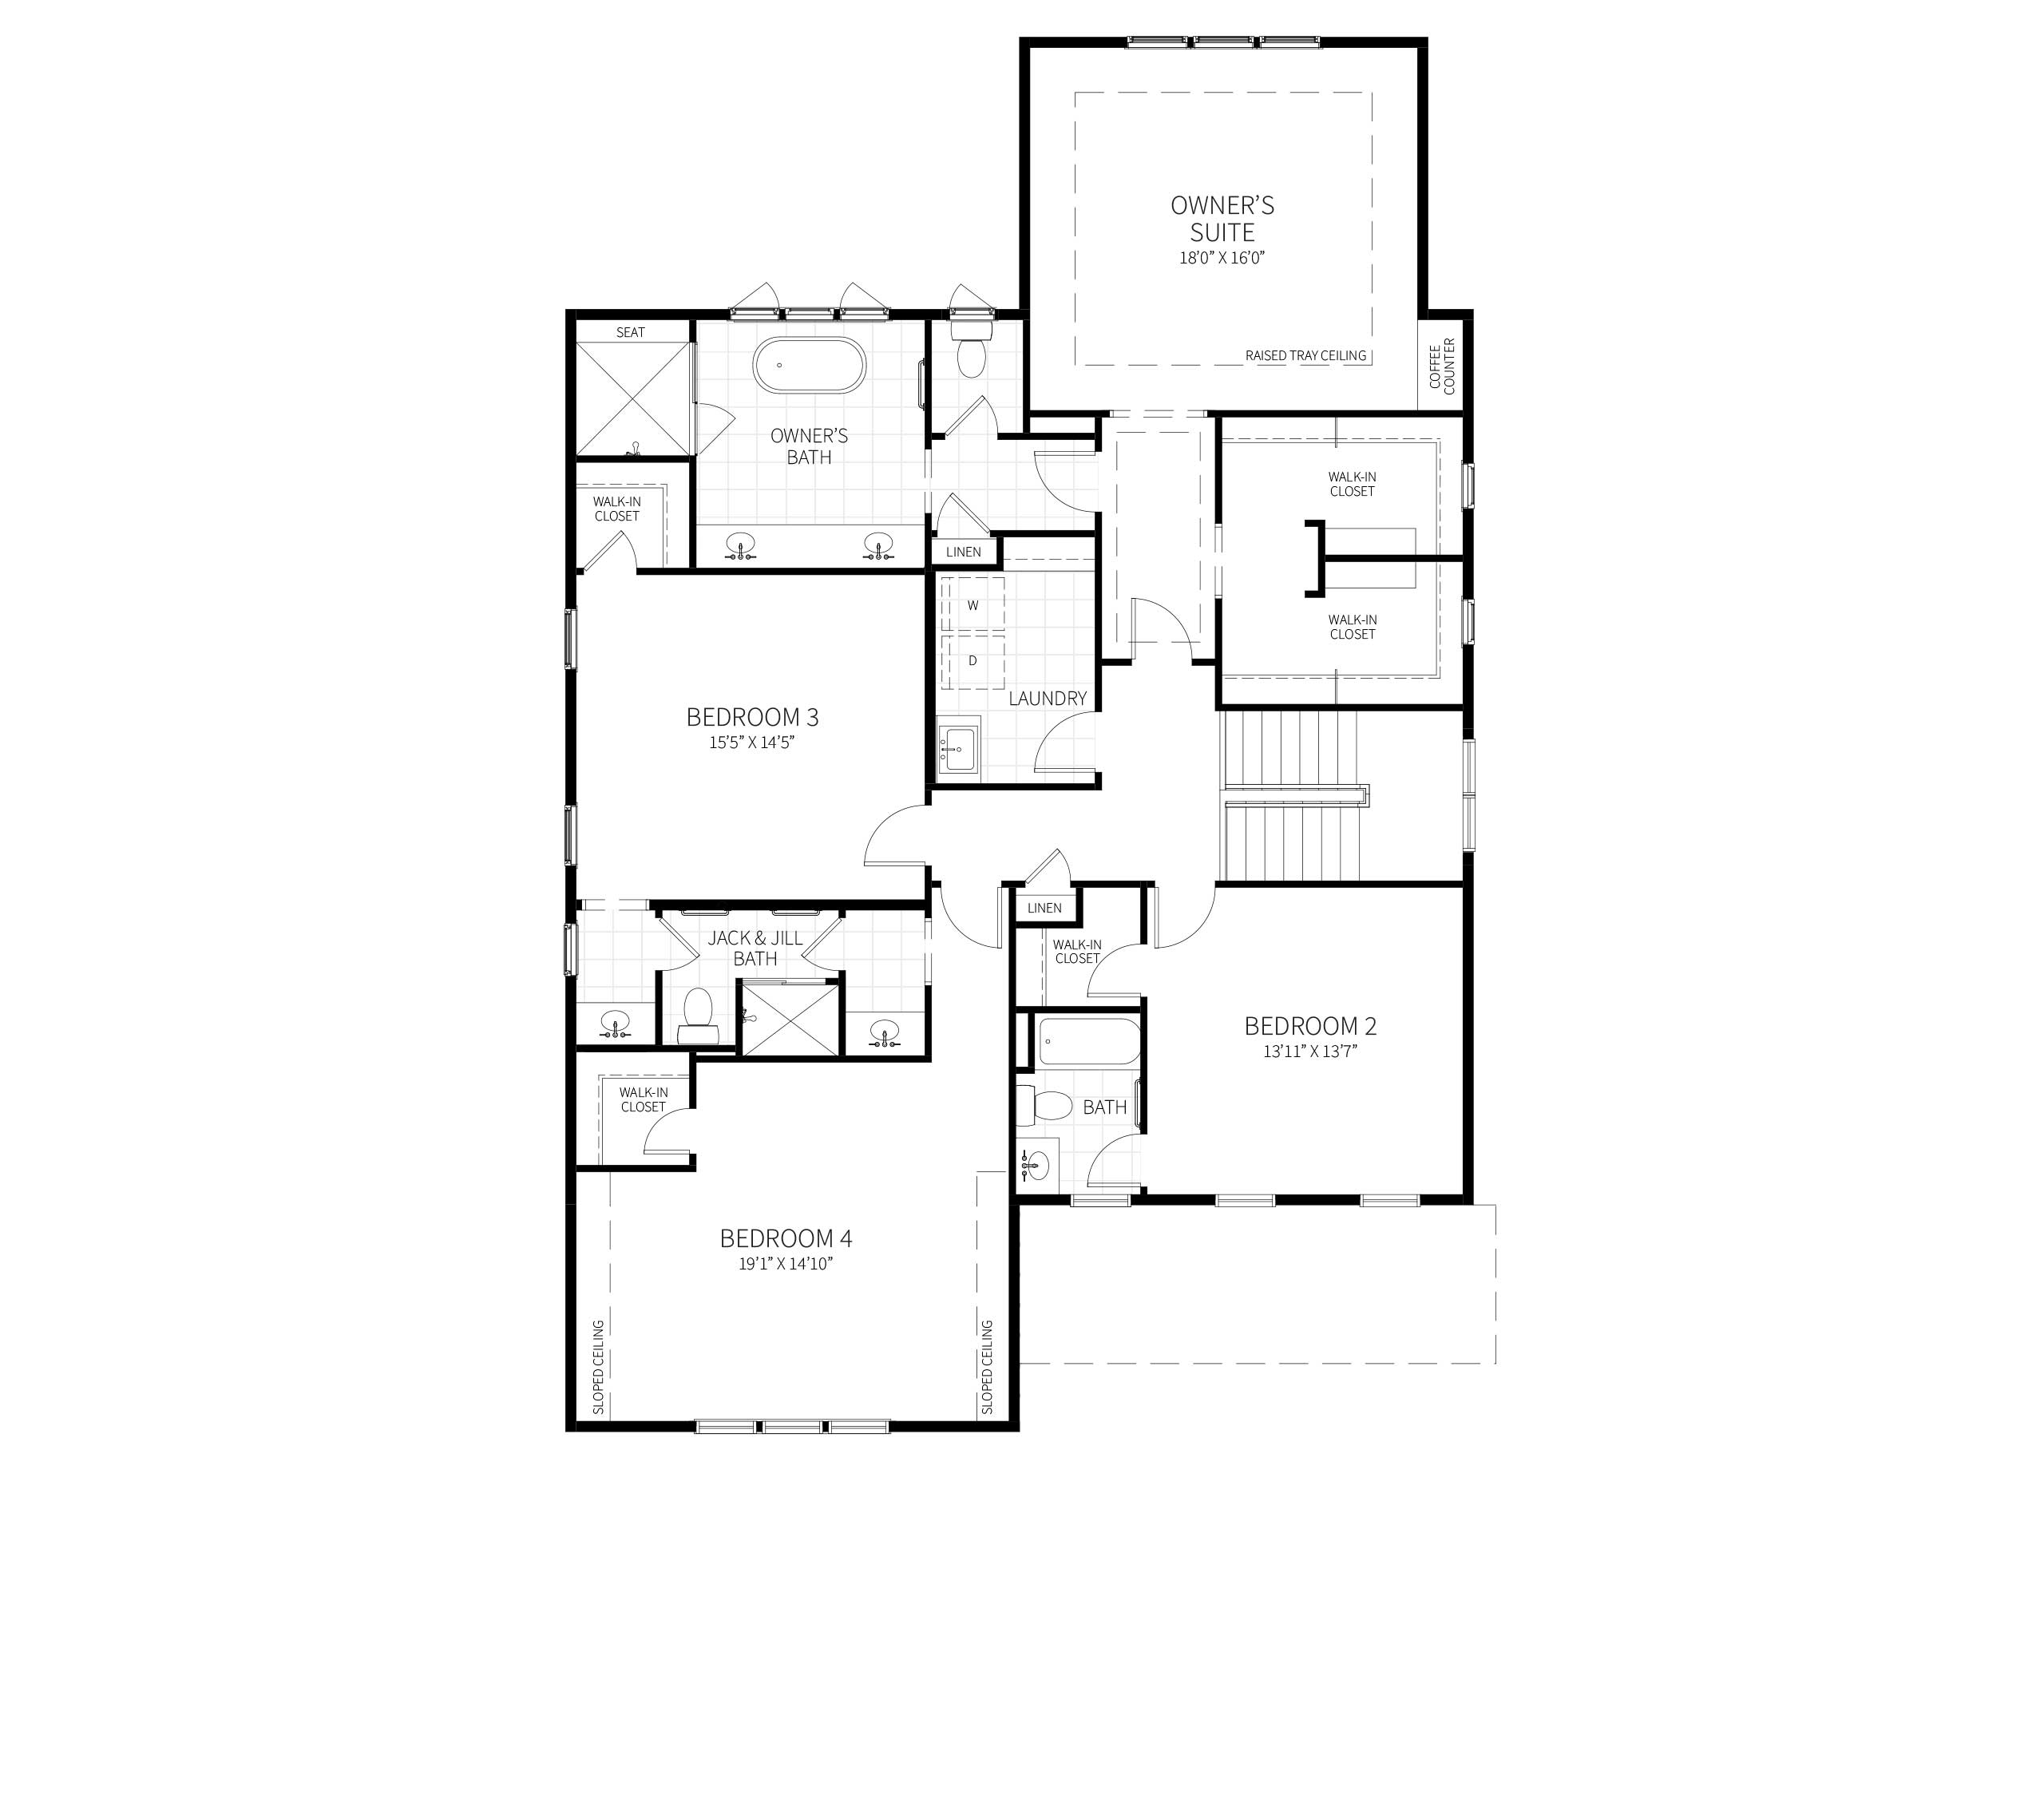 The upper level of the proposed home plan, with three bedrooms, and an expansive owner's suite.